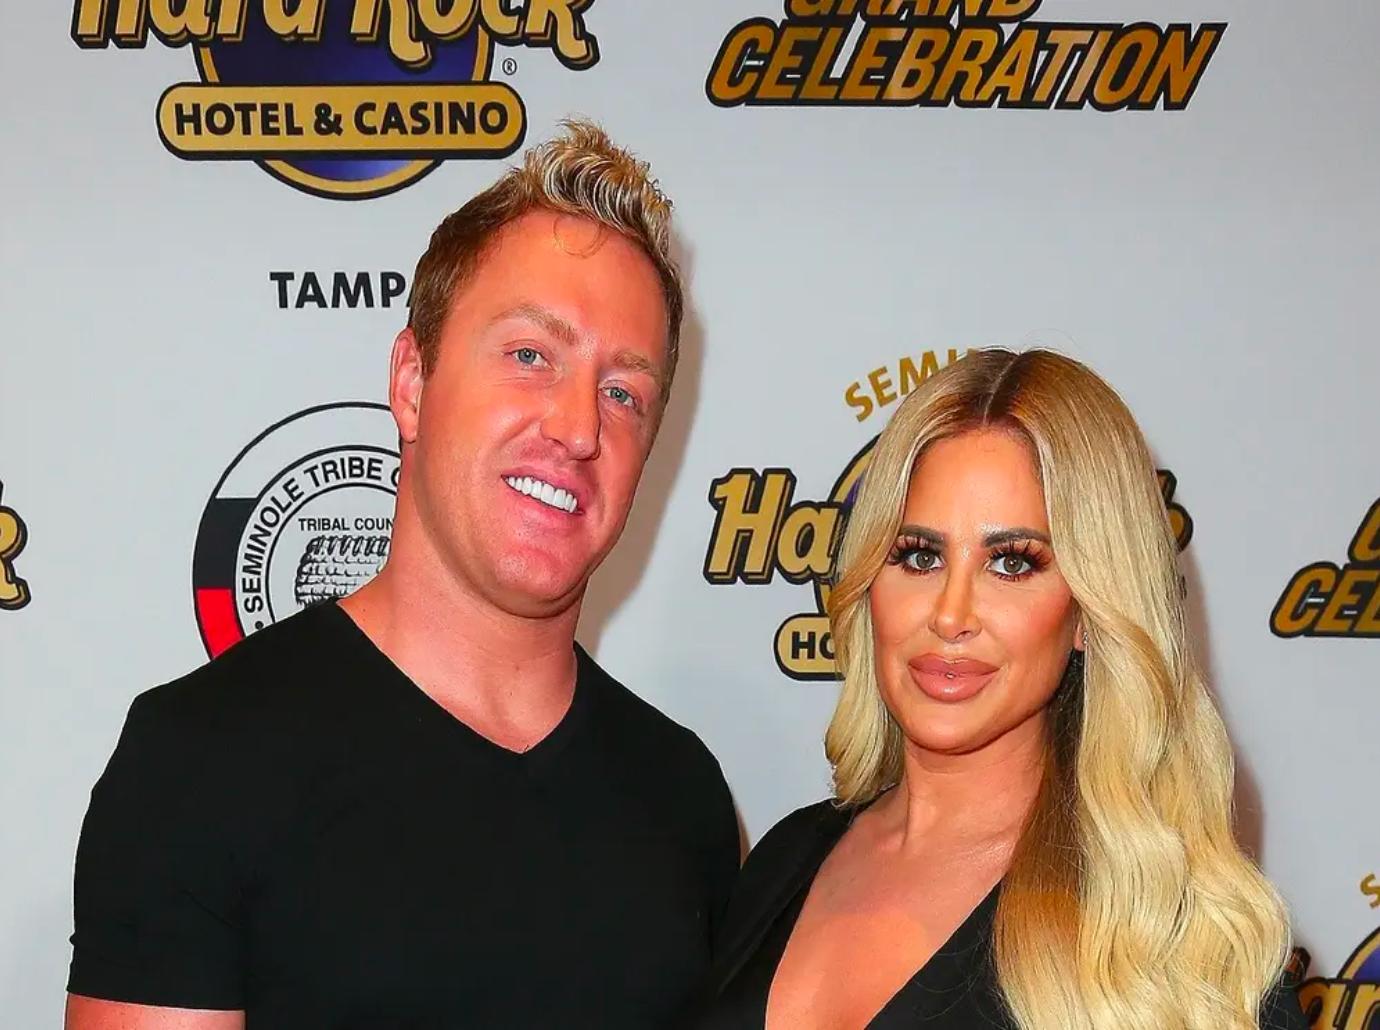 Kroy Biermann Files For Divorce From Kim Zolciak For A Second Time image picture photo